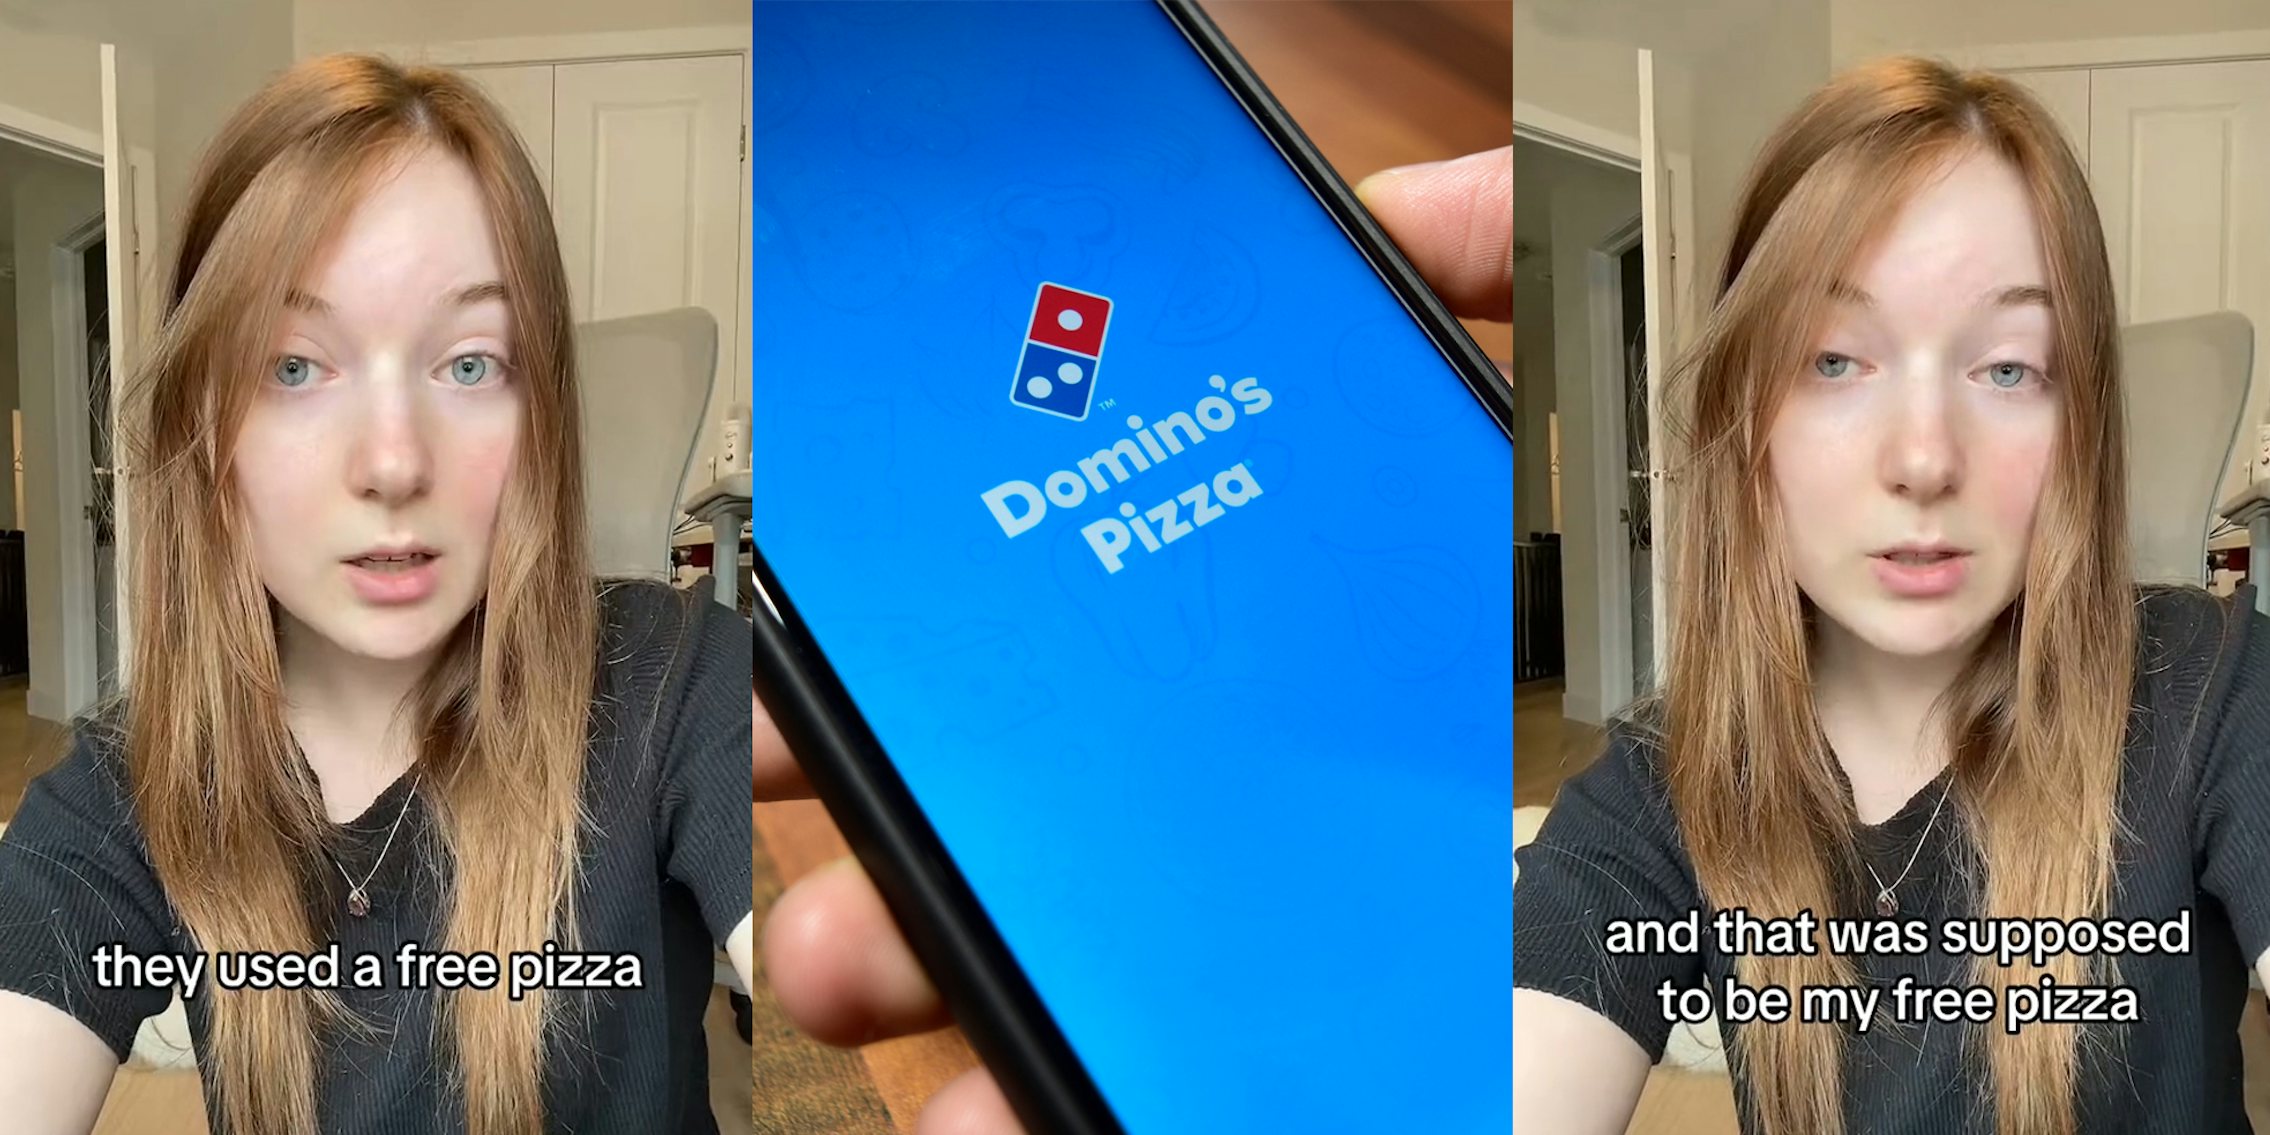 Domino's customer speaking with caption 'they used a free pizza' (l) Domino's app on phone screen in hand (c) Domino's customer speaking with caption 'and that was supposed to be my free pizza' (r)